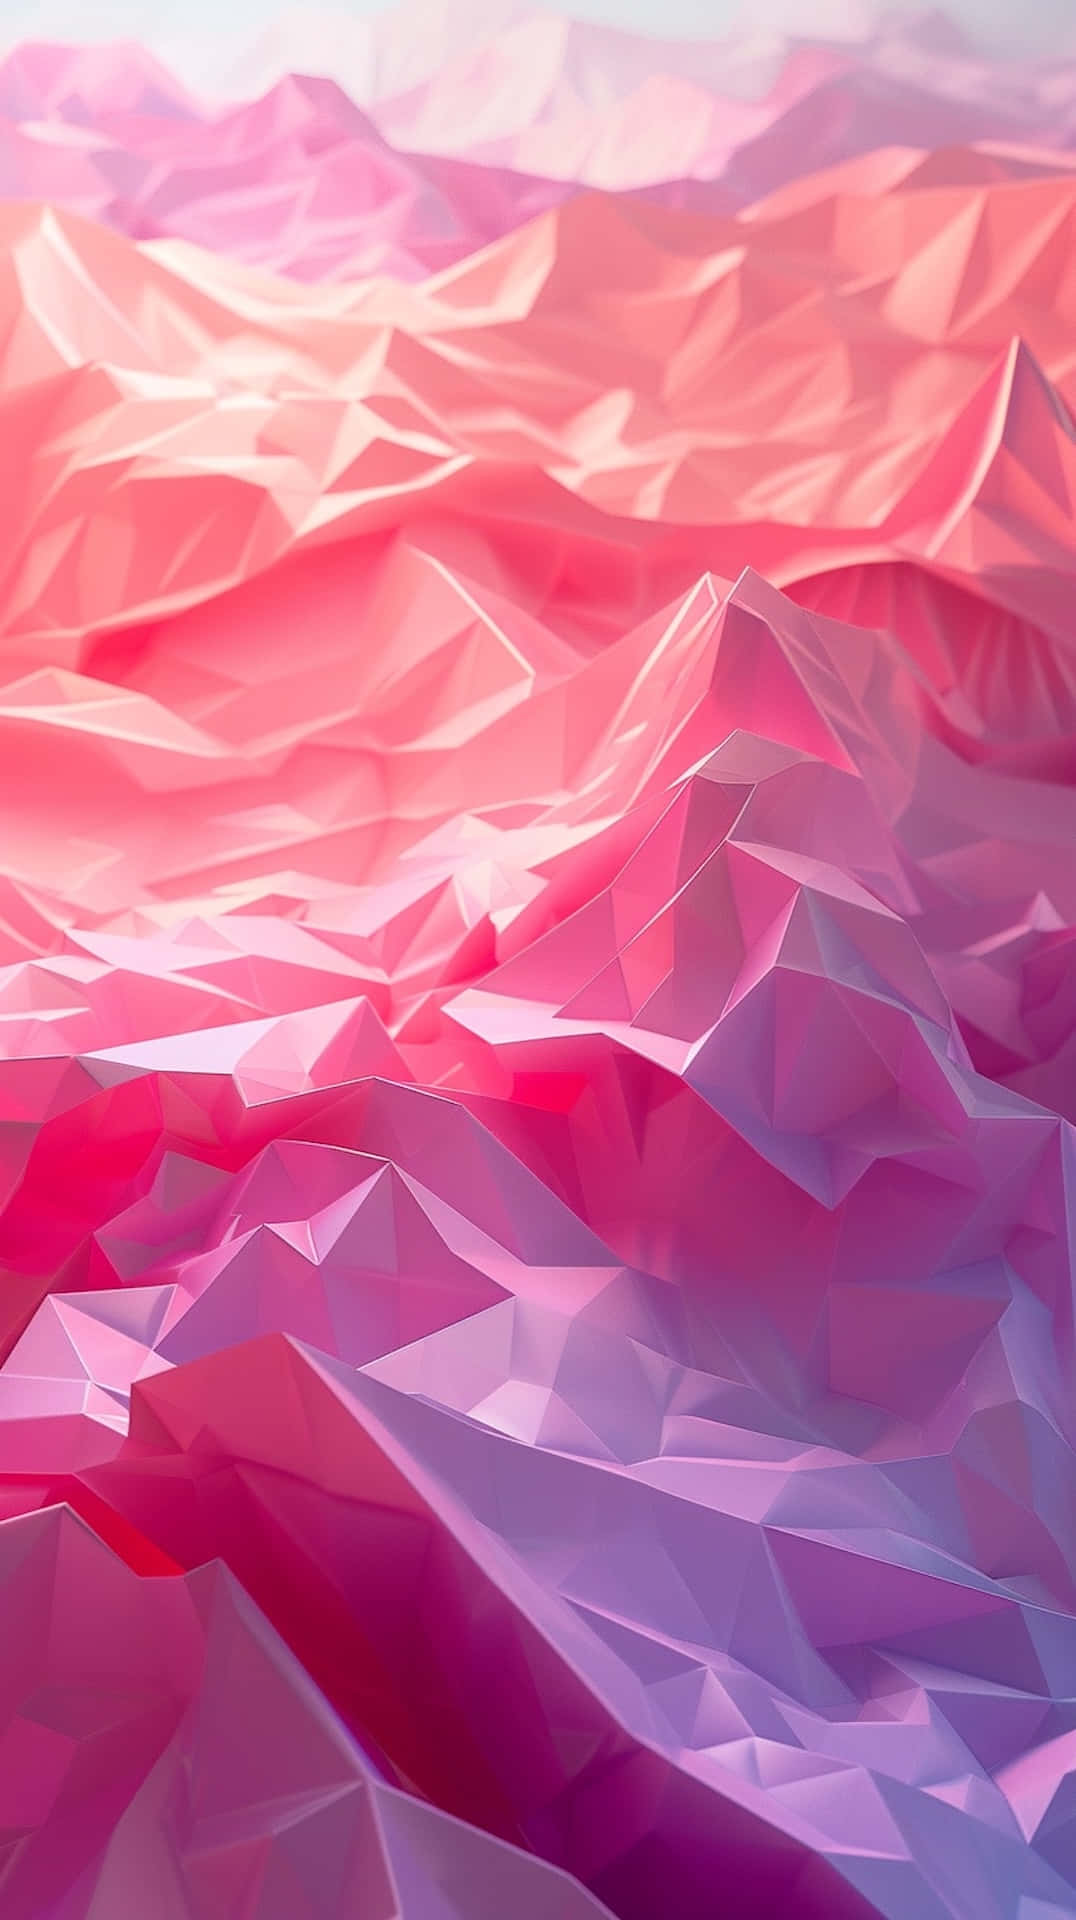 Pink Geometric Landscape Abstract Wallpaper